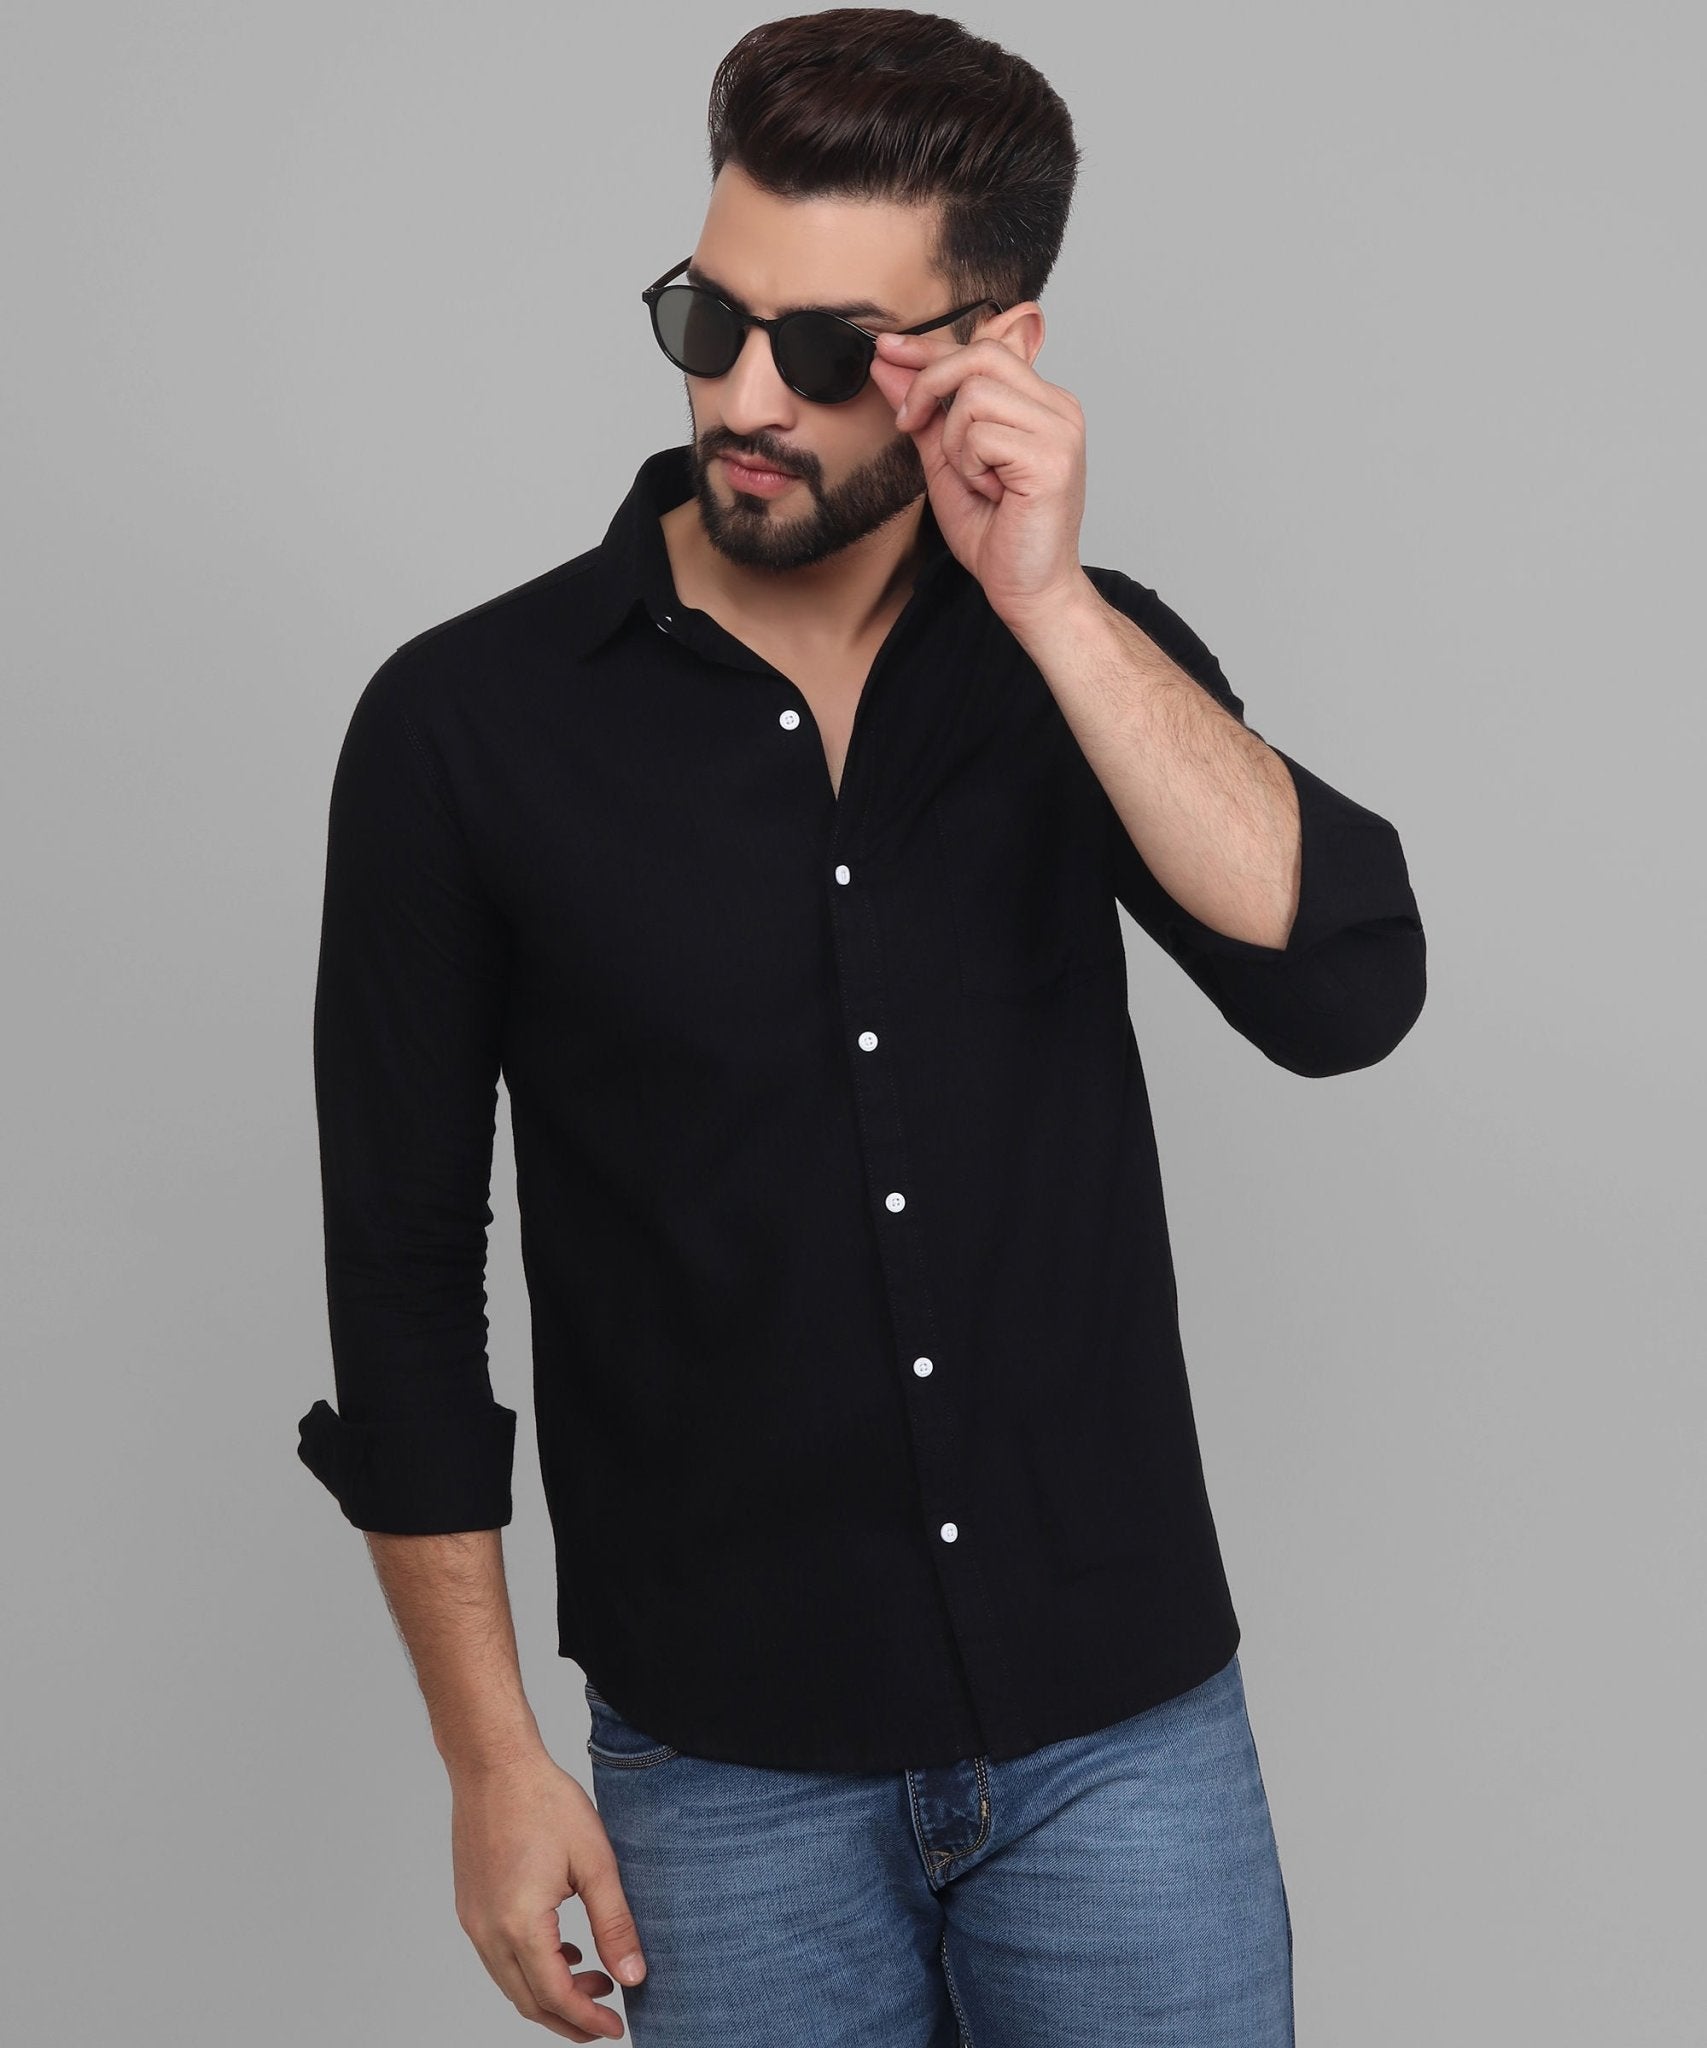 TryBuy Exclusive Fancy Button Down Black Linen Shirt for Men - TryBuy® USA🇺🇸